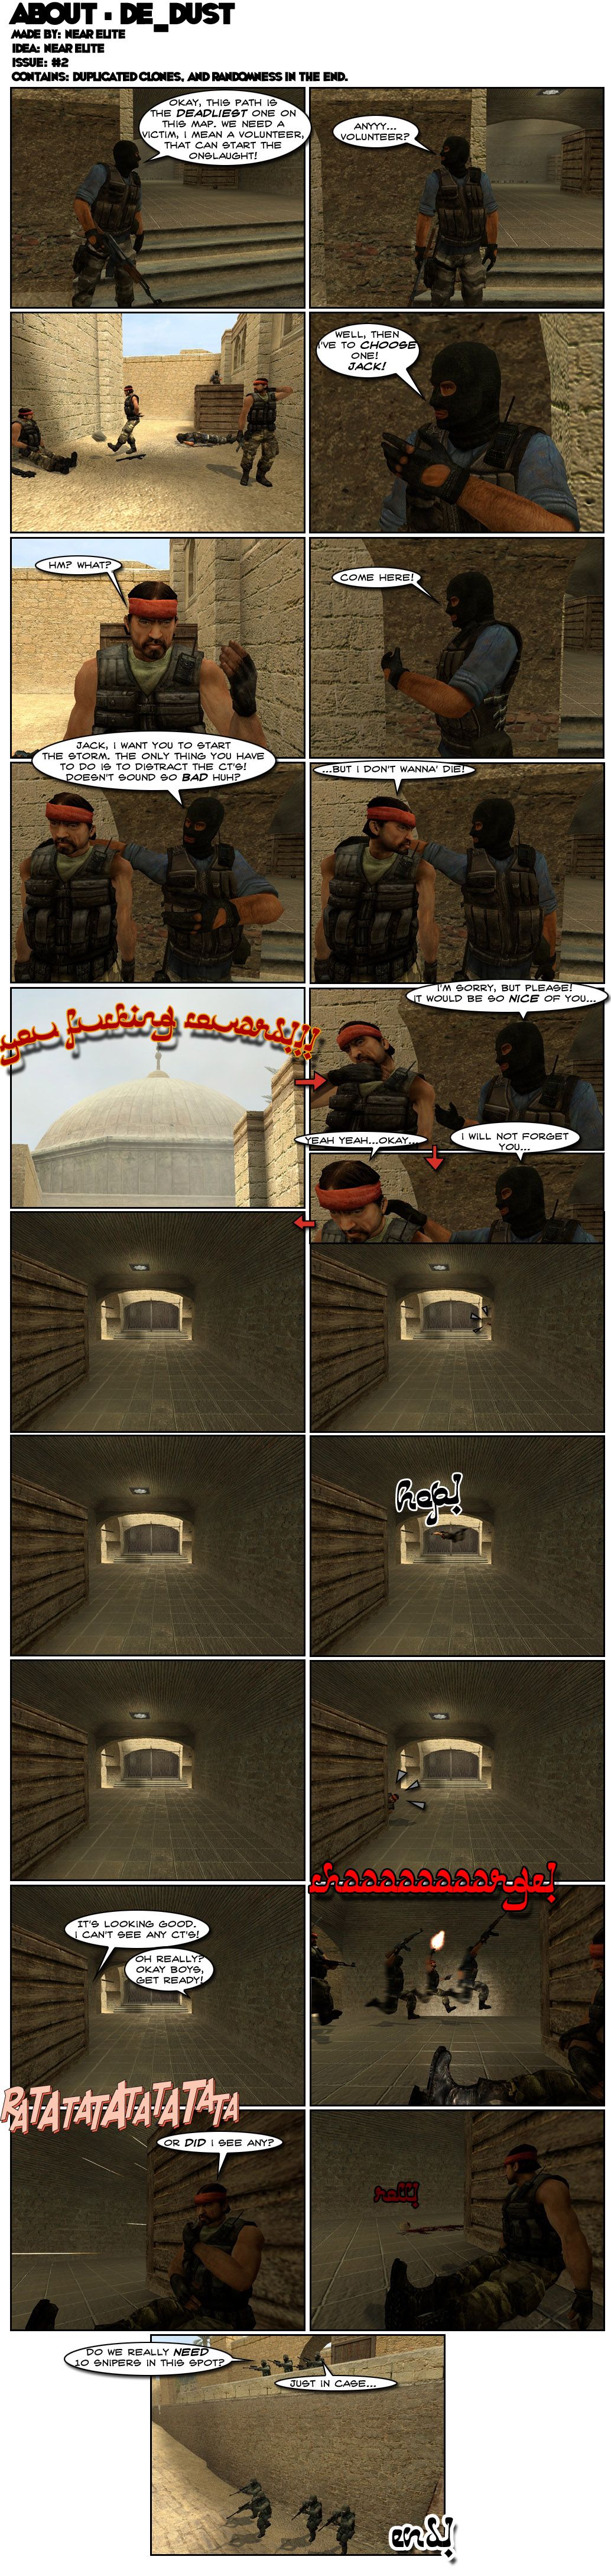 On the map DE Dust of Counter-Strike: Source, a terrorist looking at a corridor says that that path is the deadliest one on the map and that they need a victim, or rather volunteer, that can start the onslaught. He turns to his team and asks for volunteers. Three other terrorists ignore him, so he says he has to choose one and calls for a guy named Jack. Jack asks what and the leader tells him to come there, then wraps his arm around Jack's shoulders as he tells him he wants him to start the storm and that the only thing he has to do is distract the counter-terrorists. The leader asks if that's so bad but Jack replies that he doesn't wanna die, to which the leader shouts you fucking coward. The leader then apologizes and asks please, saying it would be so nice of Jack. Jack concedes with a yeah, yeah, okay, to which the leader says he will not forget Jack. At the entrance to the corridor, Jack's head peeks out for a moment, then Jack does a jump and a roll towards cover. Jack peeks out of cover, then tells his team it's looking good and he can't see any counter-terrorists. The leader asks oh, really, then tells his team to get ready. With a scream, the terrorists charge past Jack. Cue the sound of gunfire, to which Jack wonders if he saw any. A skull rolls past him in response. On the other end, a counter-terrorist asks if they really need ten snipers in that spot, to which another replies just in case. The end.